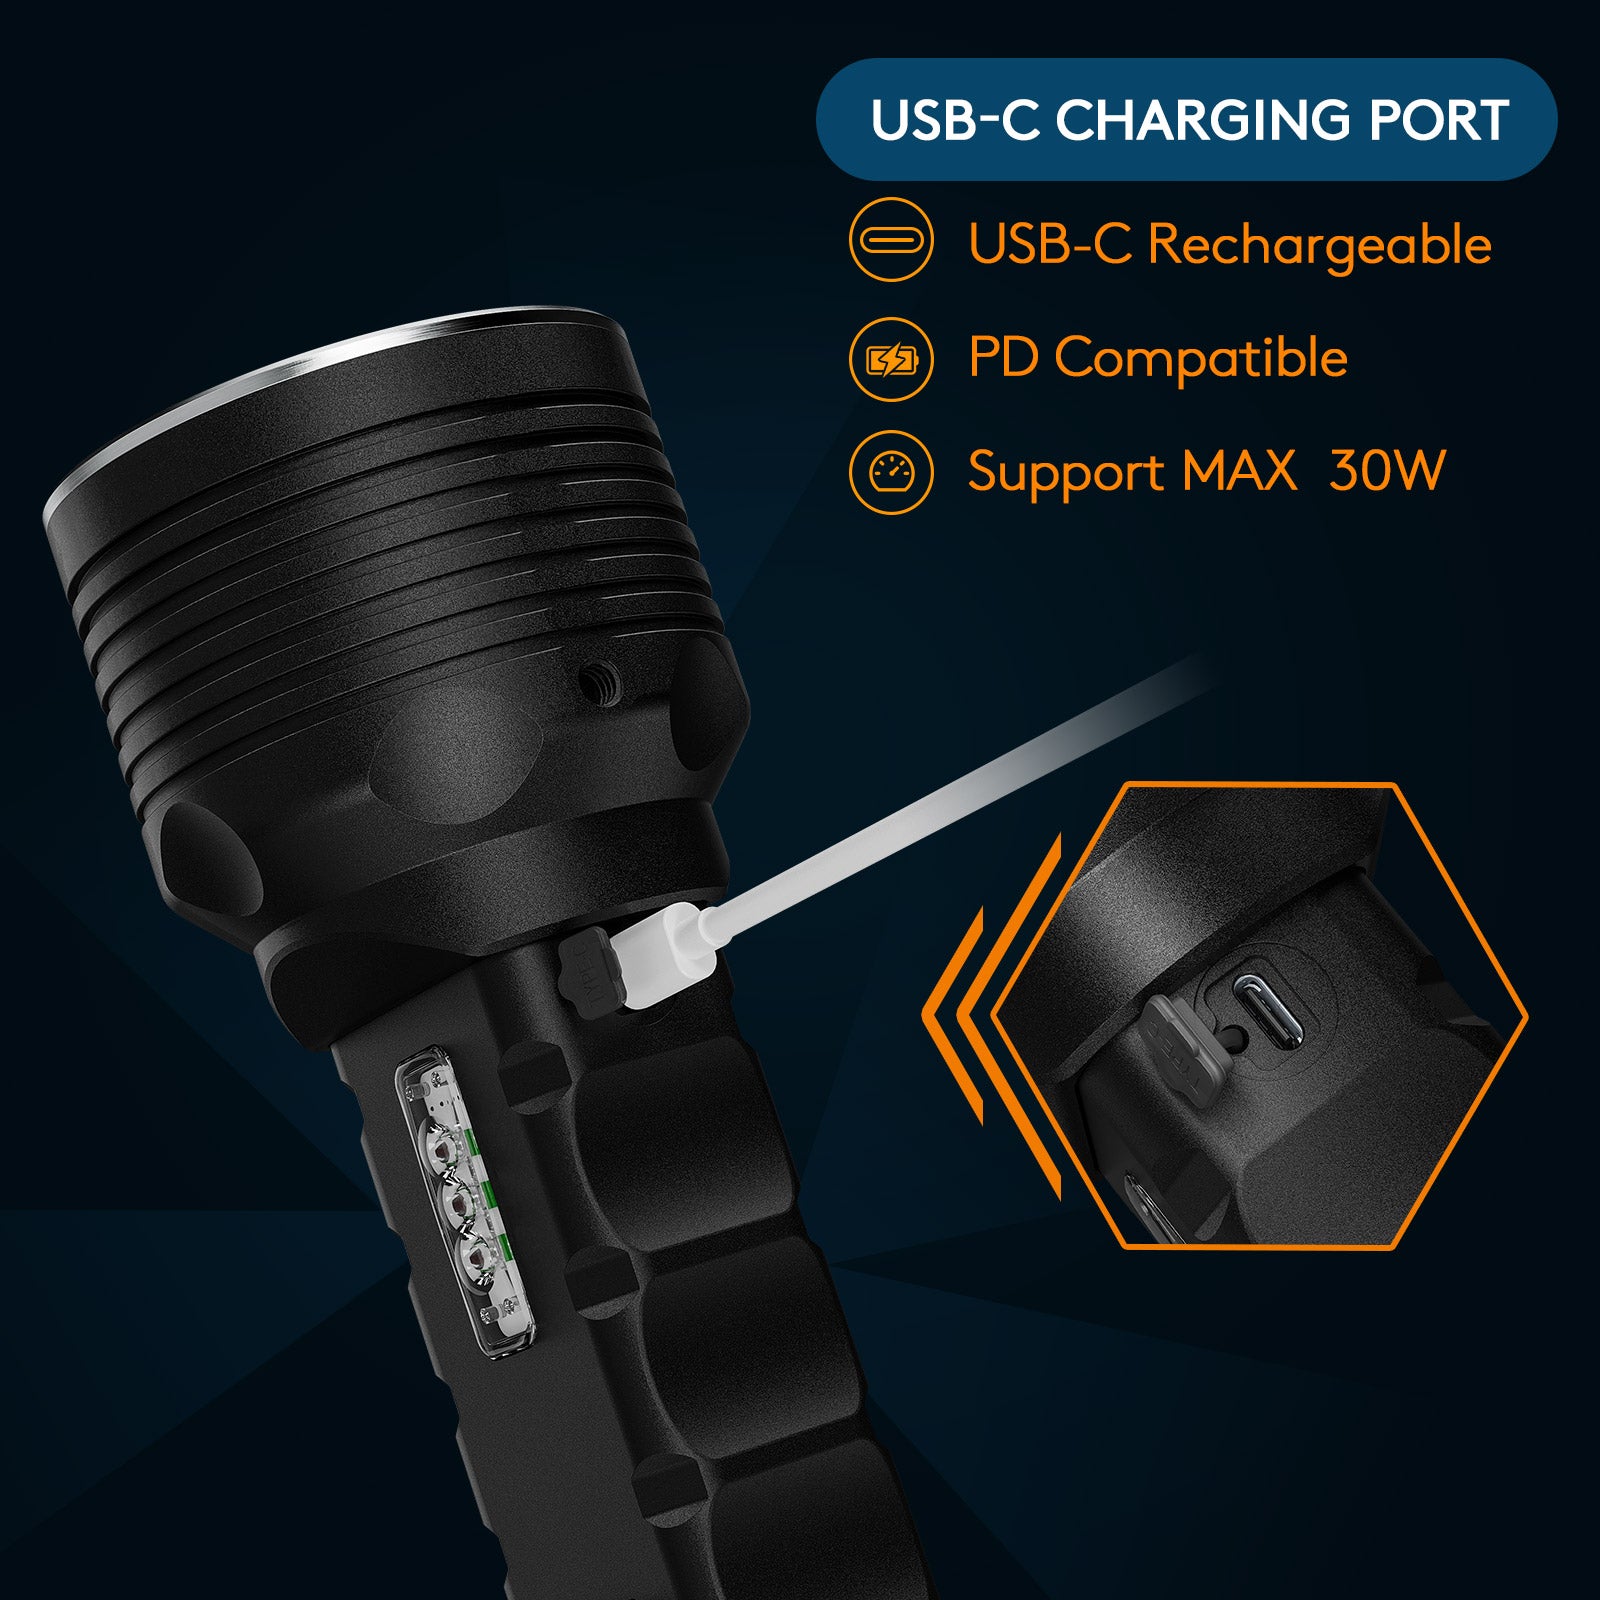 USB-C Quick Charge